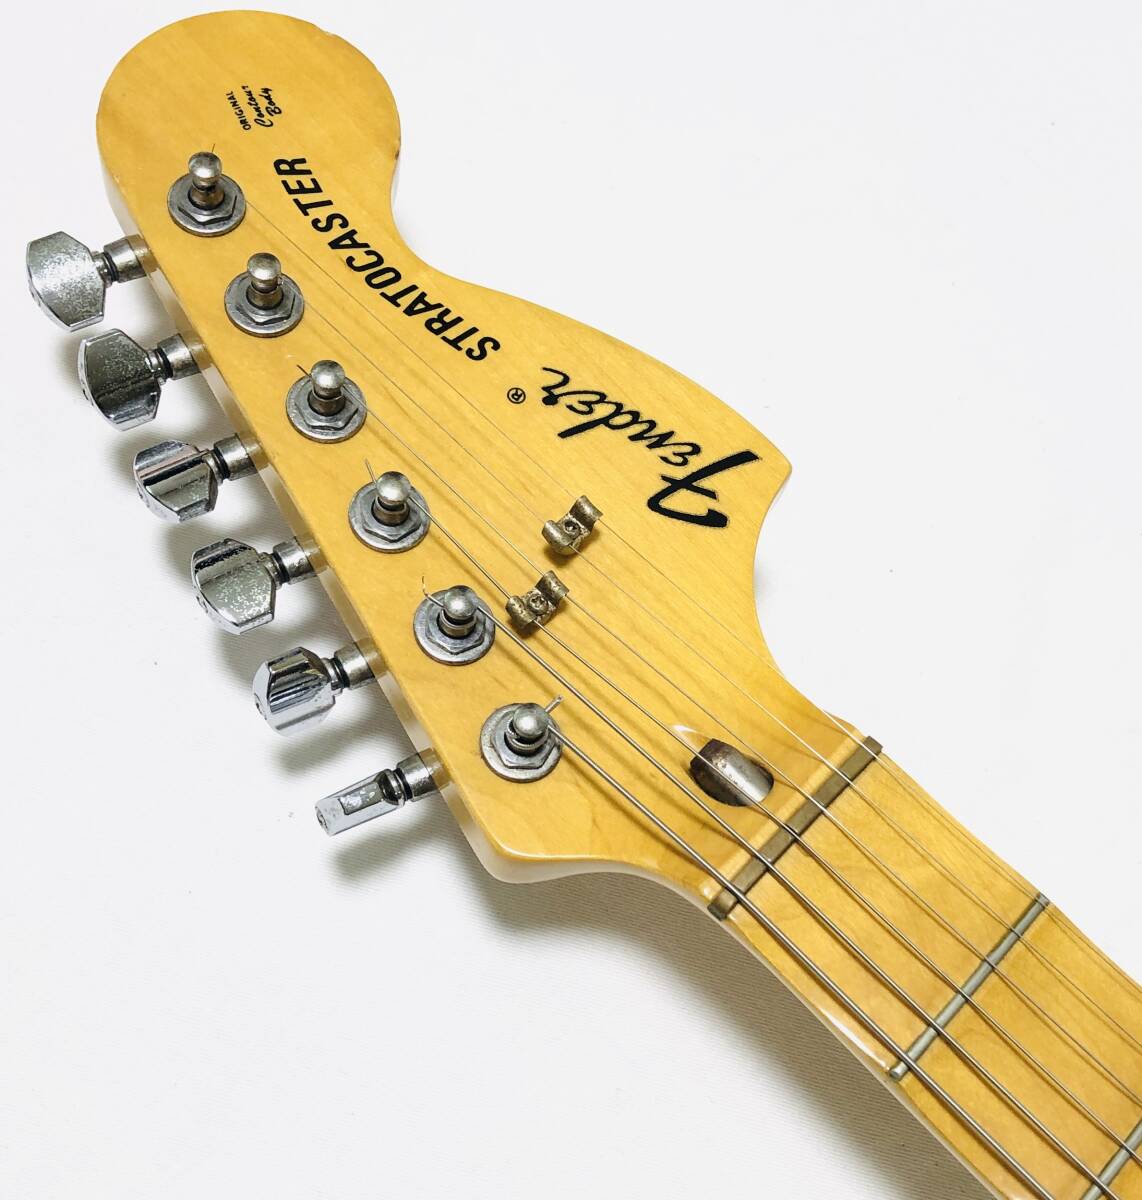 Fender Stratocaster ST72-SC Crafted in Japan フェンダー ストラトキャスター スキャロップモデル Yngwie Malmsteenの画像2